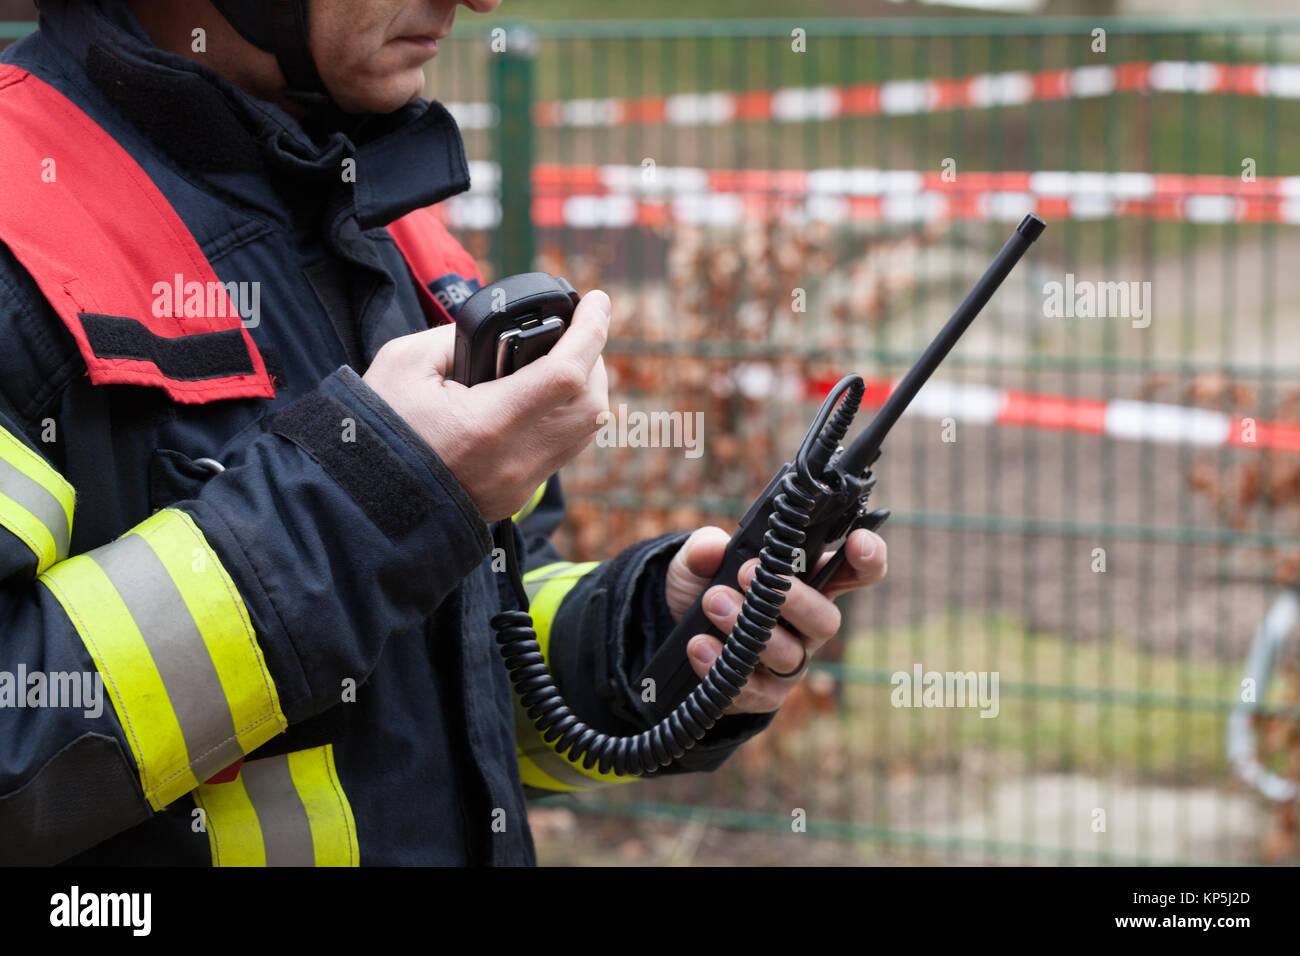 firefighter with radio in action Stock Photo